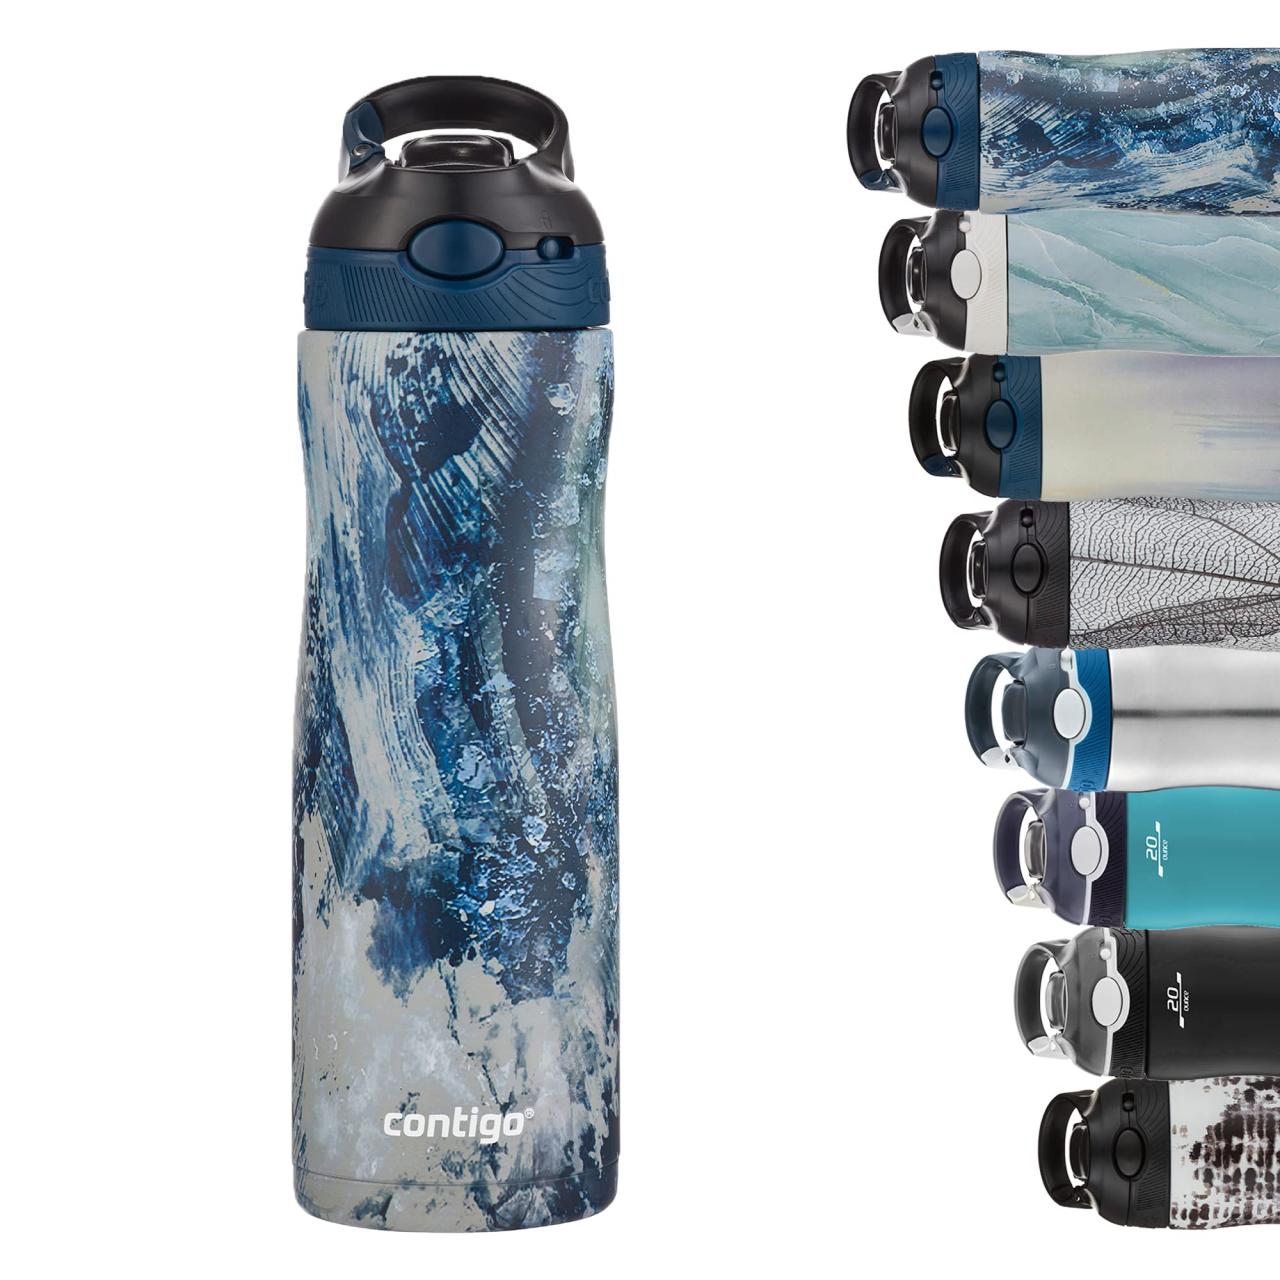 Contigo Autospout Chill Couture Drinking Bottle with Straw, Stainless Steel  Water Bottle, 100% Leak-Proof, Insulated Bottle for Sports, Bike, Hiking,  590 ml, Cloudburst : Amazon.com.au: Home Improvement